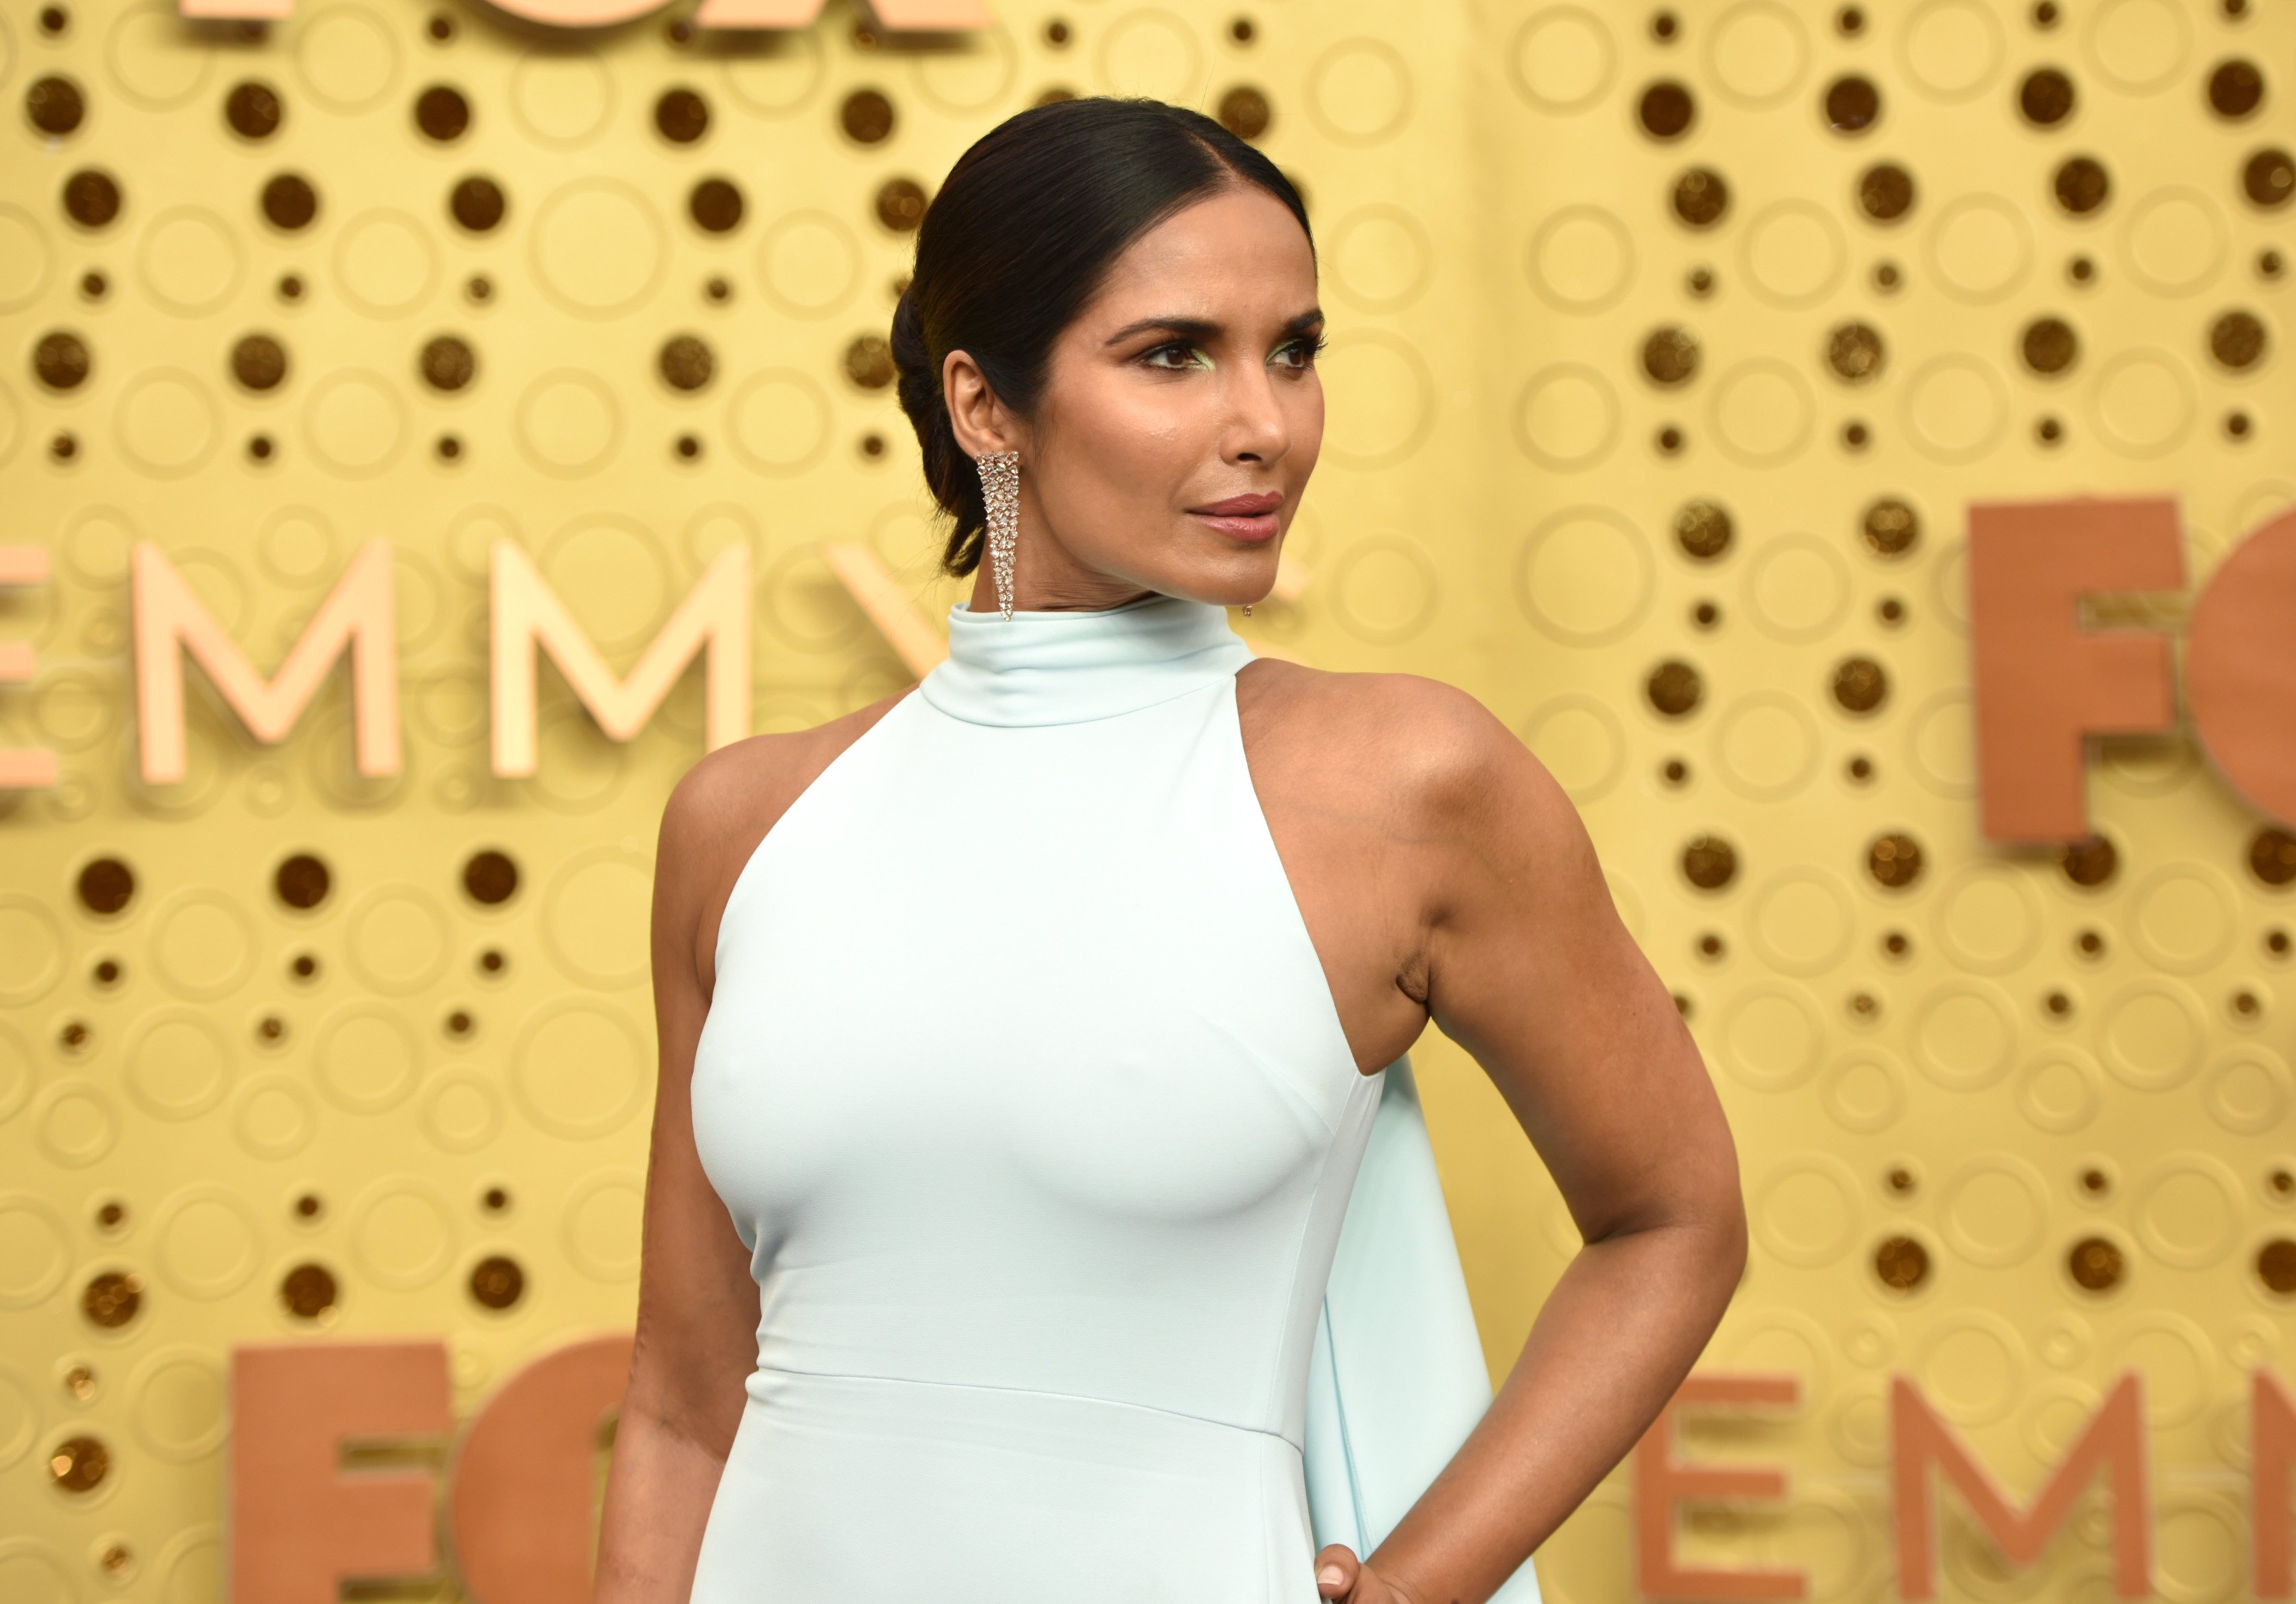 Padma Lakshmi attends the Emmy Awards in Los Angeles, California on September 22, 2019 | Photo: Getty Images